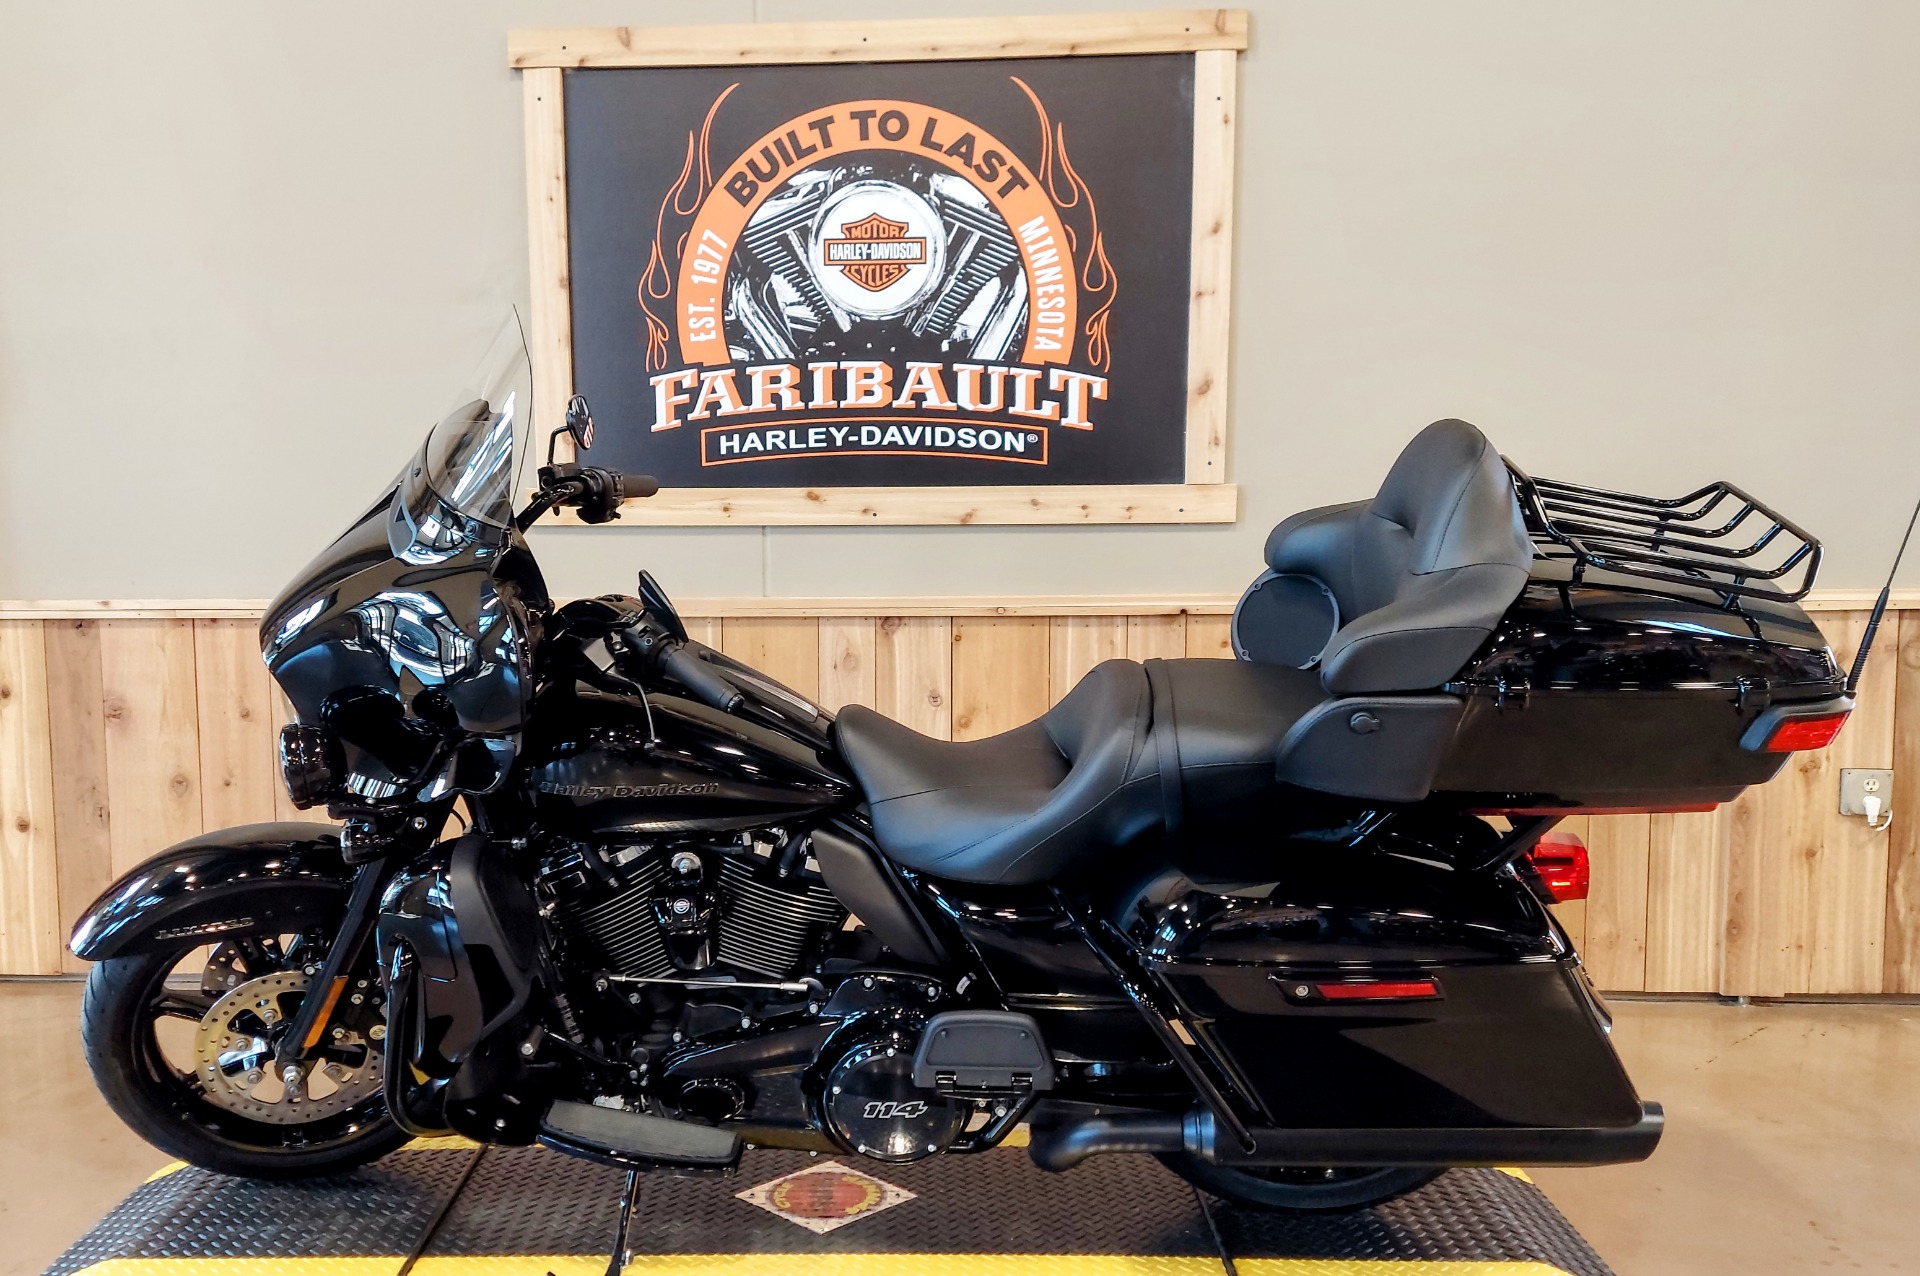 New 2021 Harley Davidson Ultra Limited Motorcycles In Faribault Mn To633263 Vivid Black Black Pearl Option